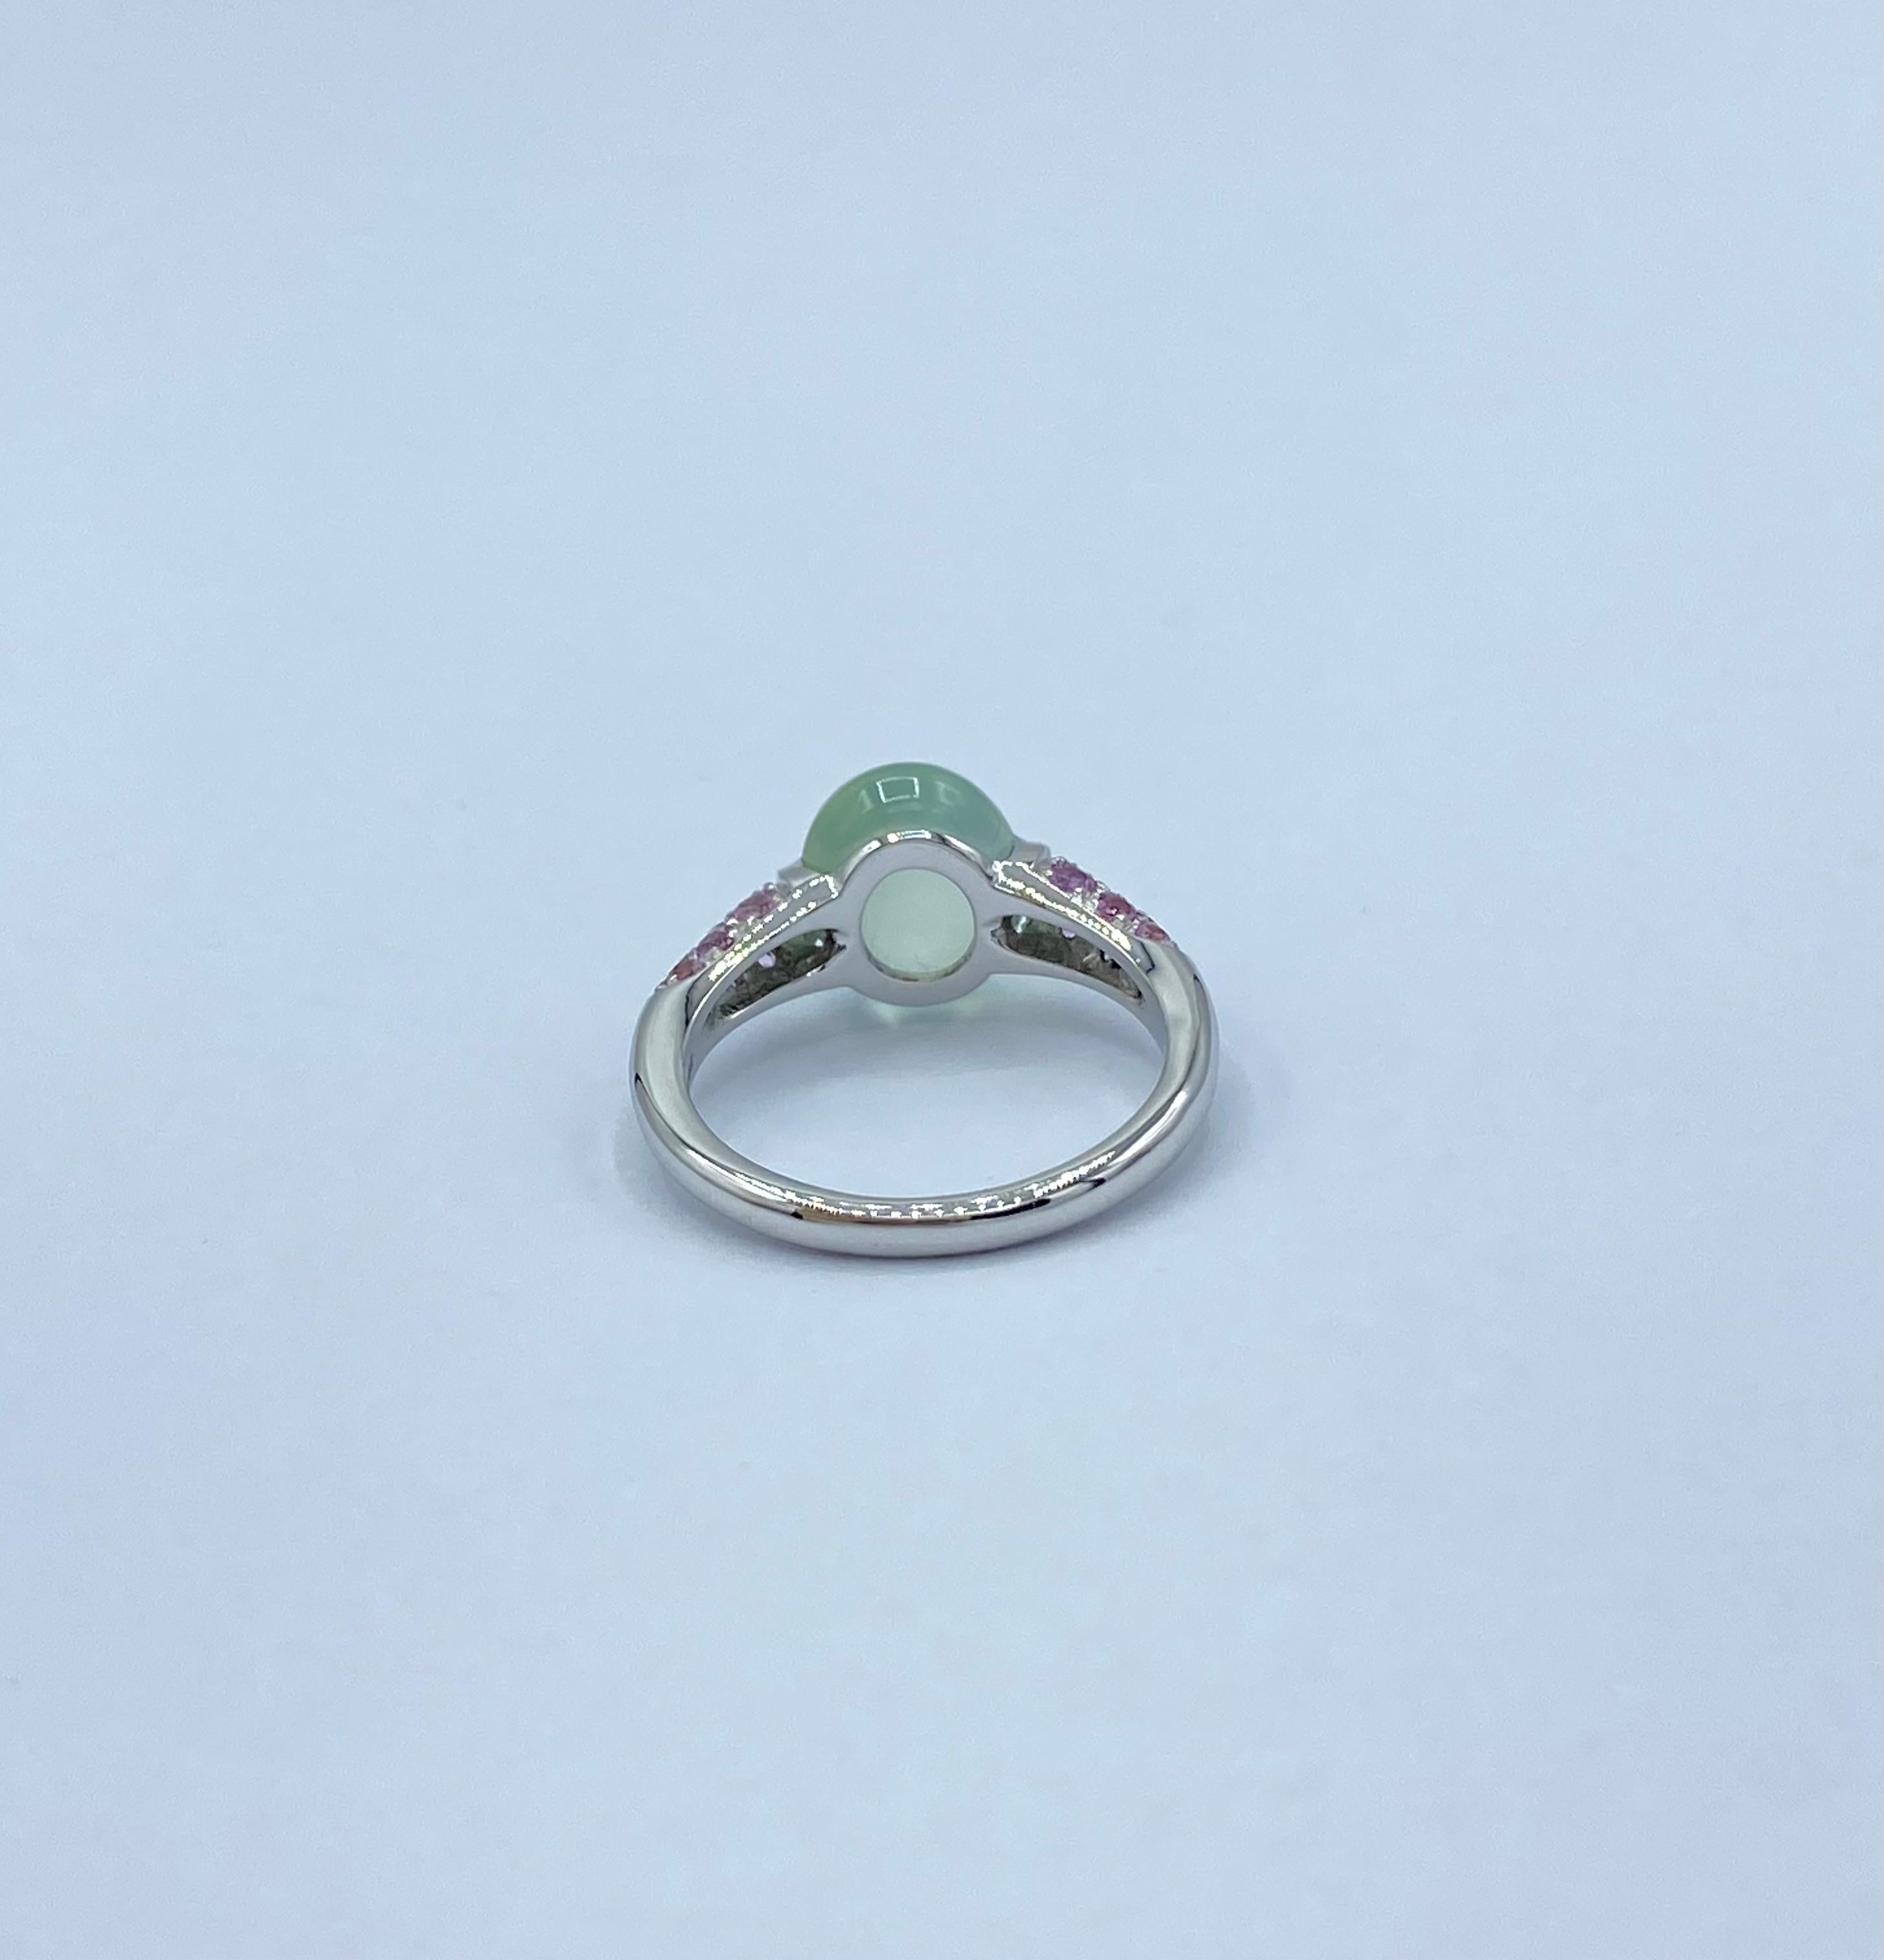 Prehnite Gemstone Cabochon Pink Sapphire White 18 Kt Gold Ring Made in Italy In New Condition For Sale In Bussolengo, Verona